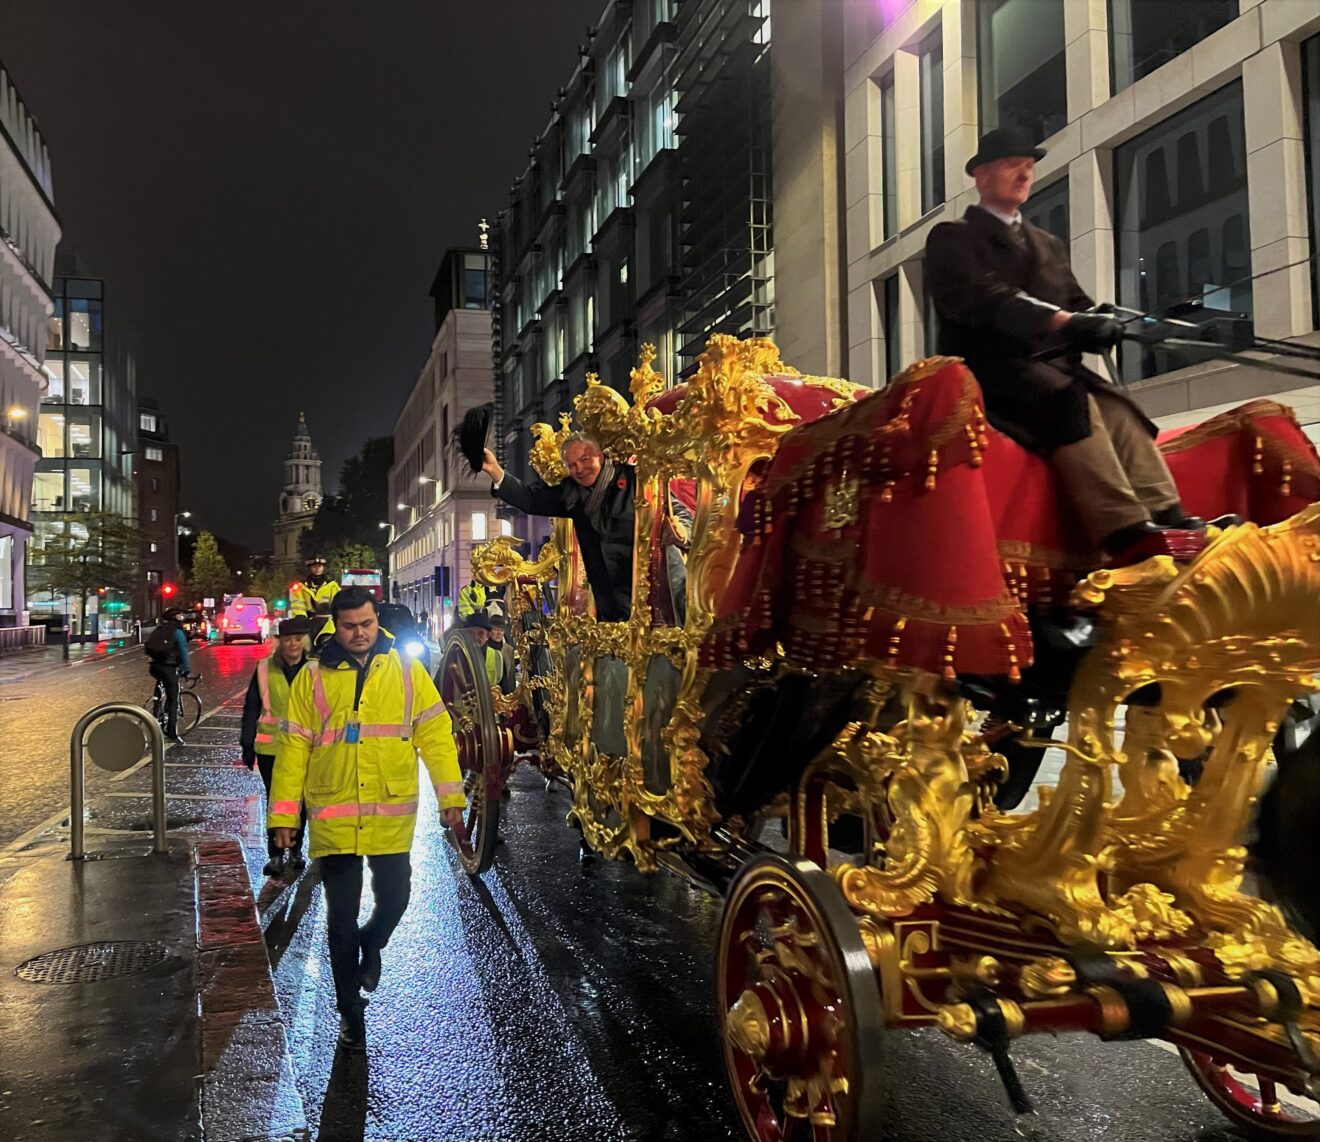 City workers get a sneak peek at the Lord Mayor's Show with secret rehearsal